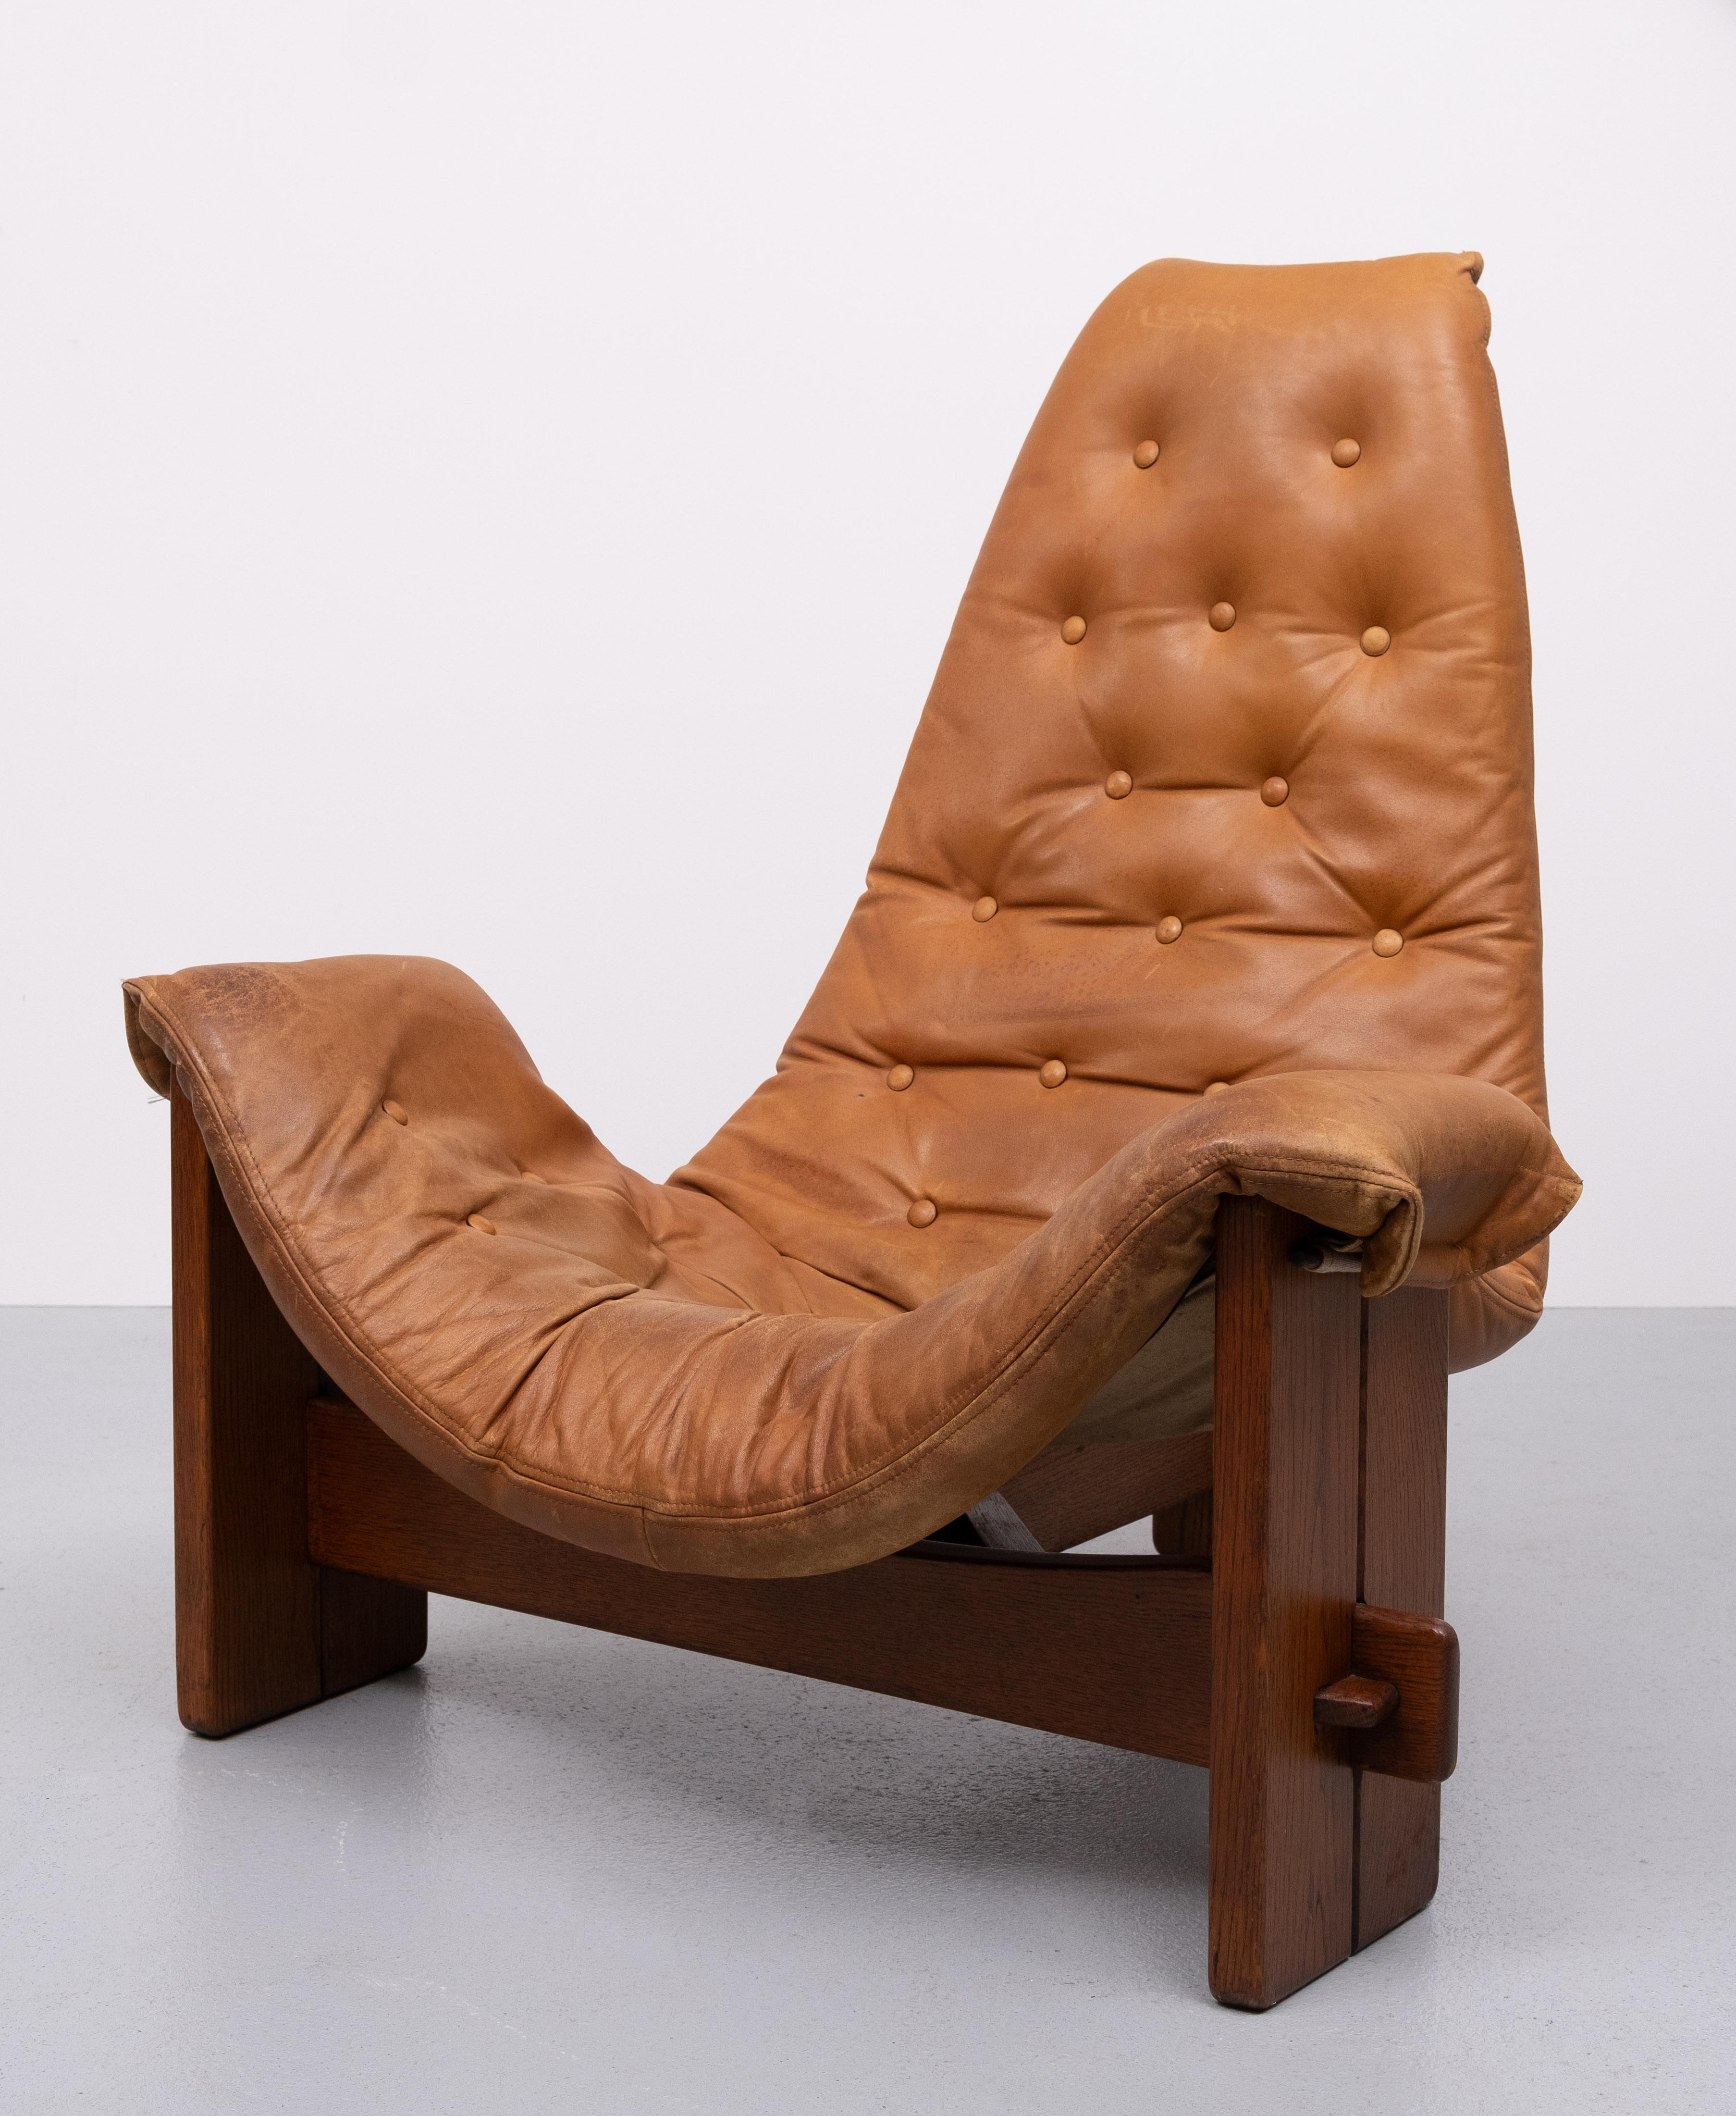 Mid-Century Modern  Brutalist Sling Lounge Chair in Full Original Condition 1960s Brazil  For Sale